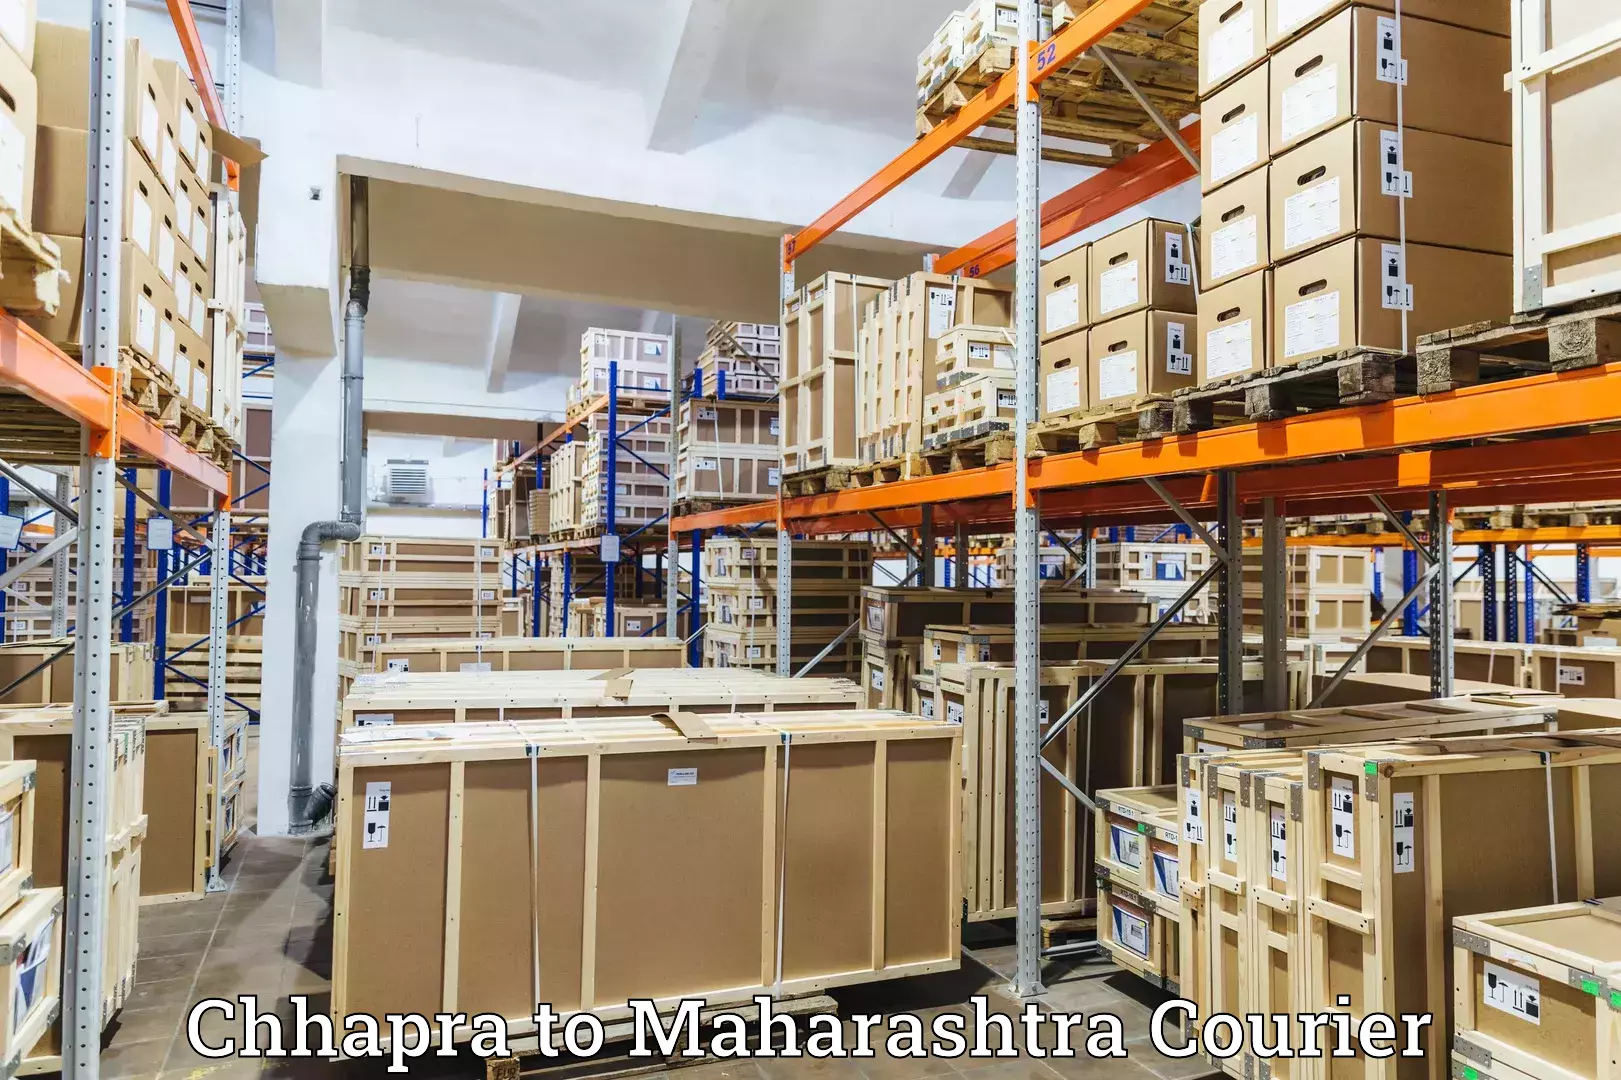 Same-day delivery options Chhapra to Chandrapur